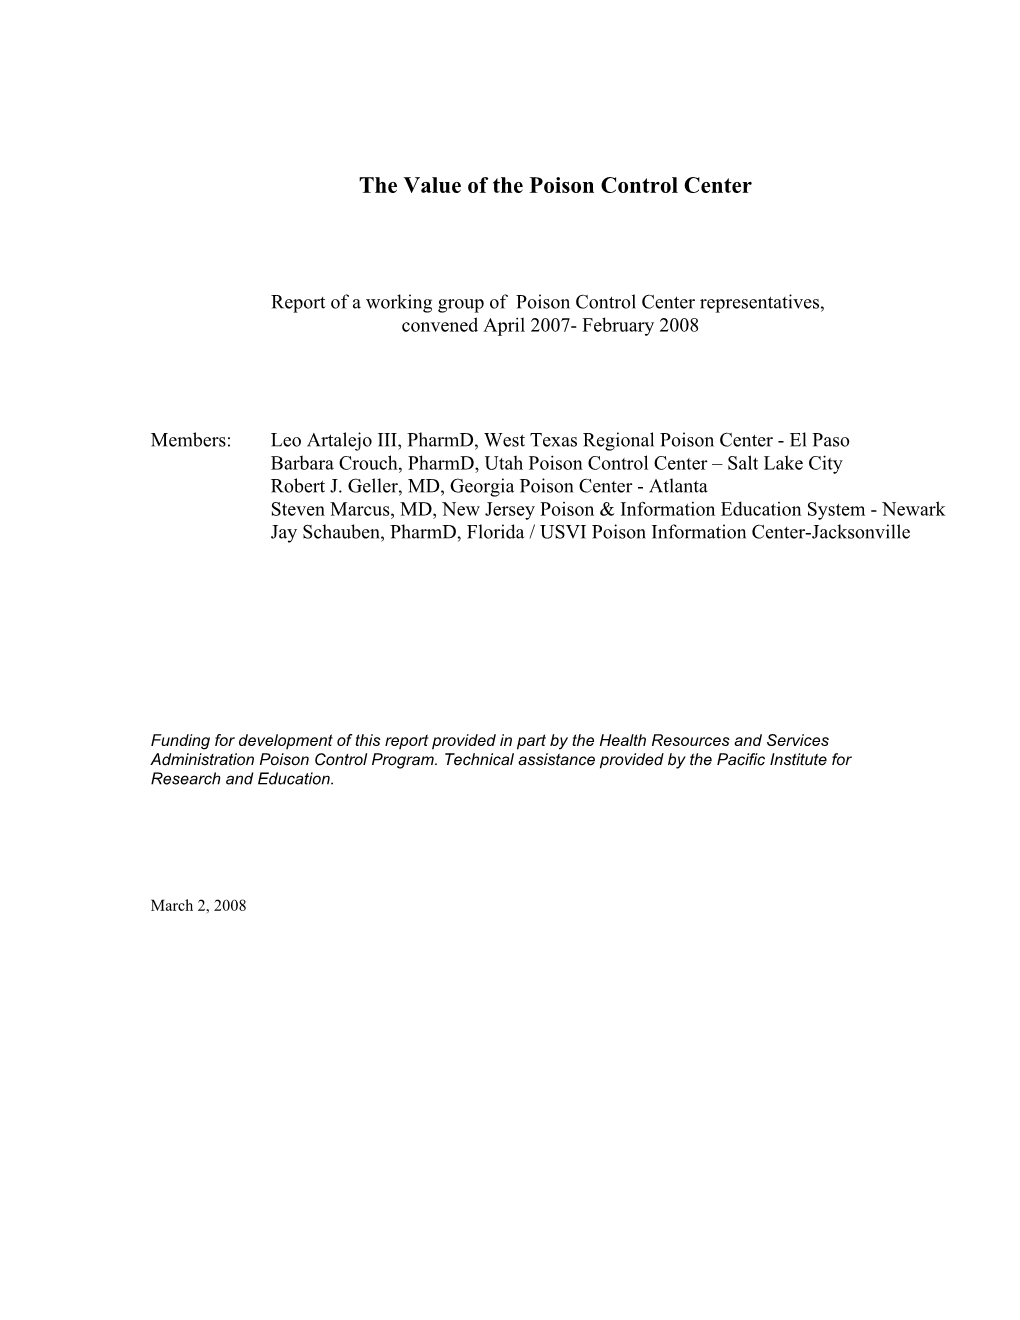 The Value of the Poison Control Center